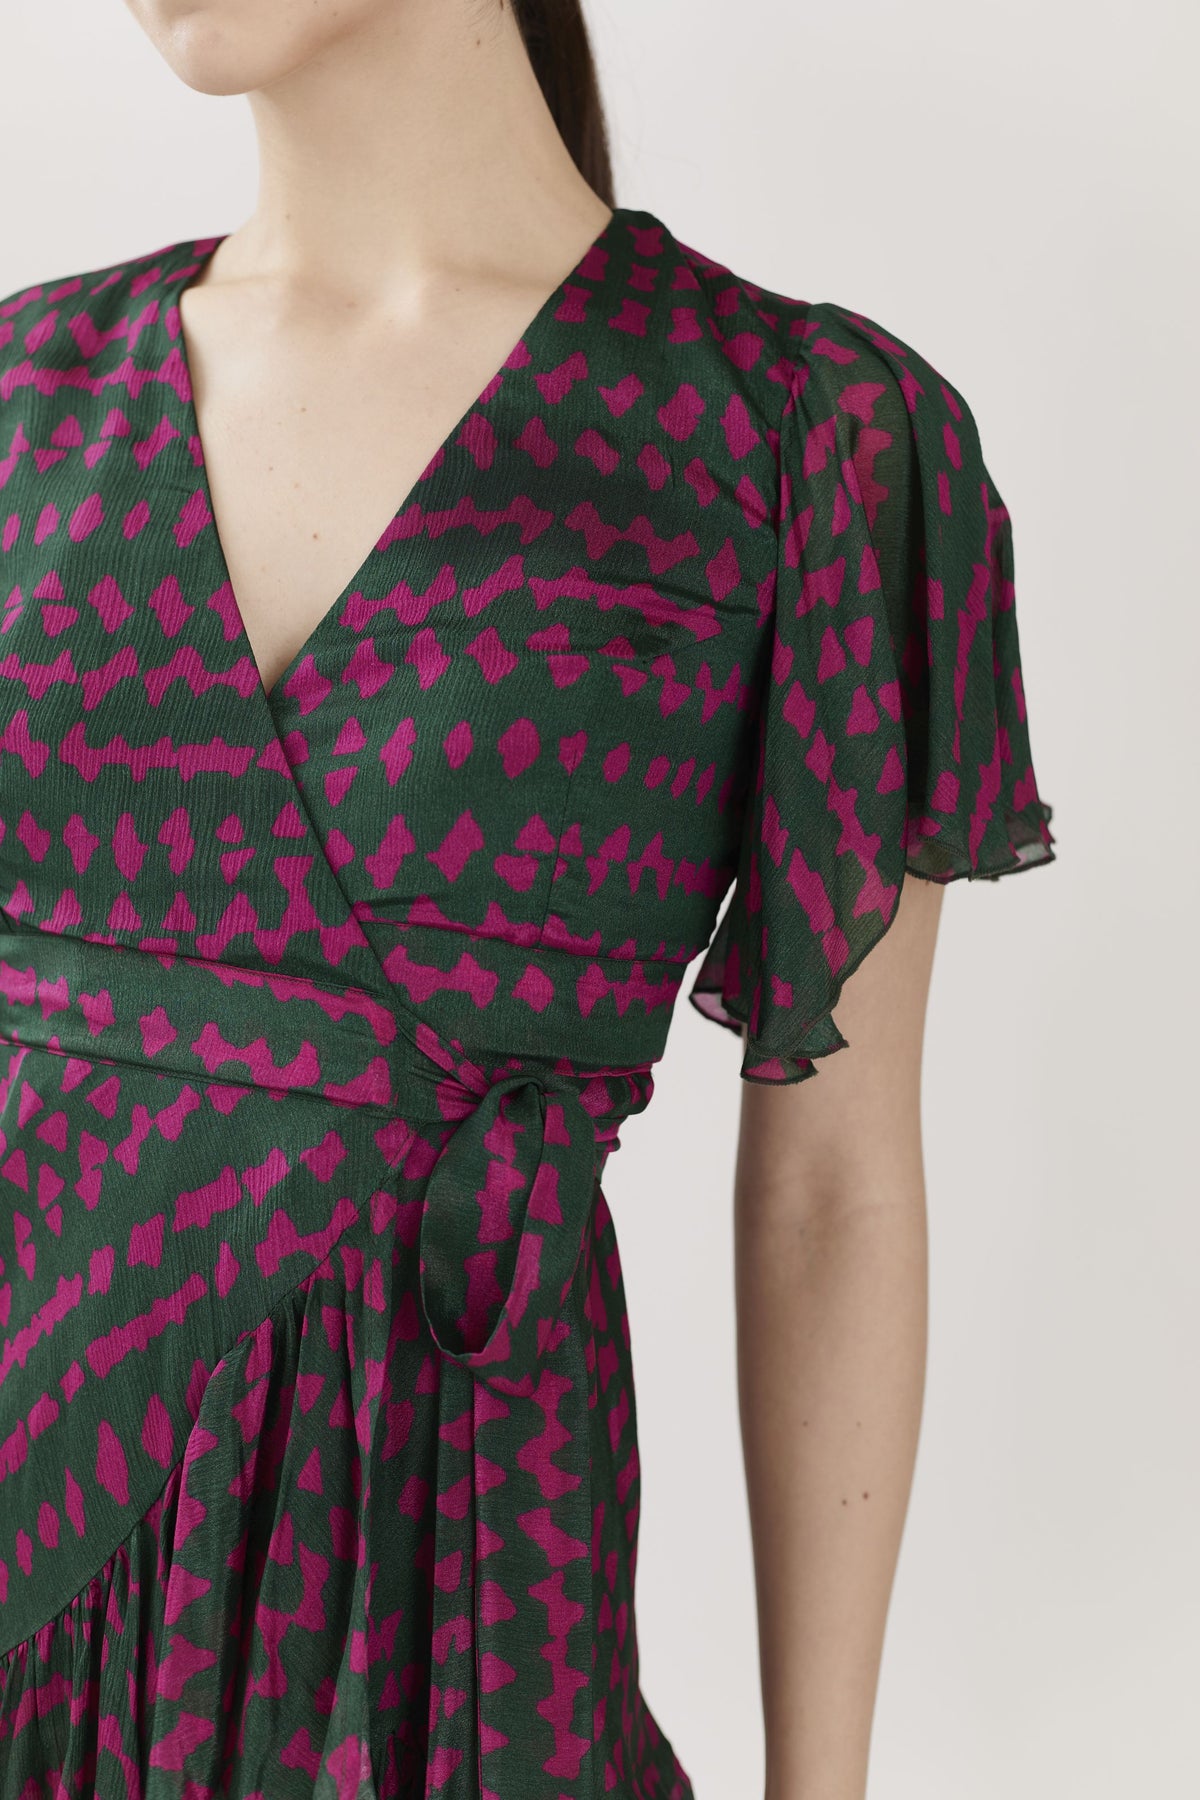 GREEN AND PINK ABSTRACT WRAP DRESS